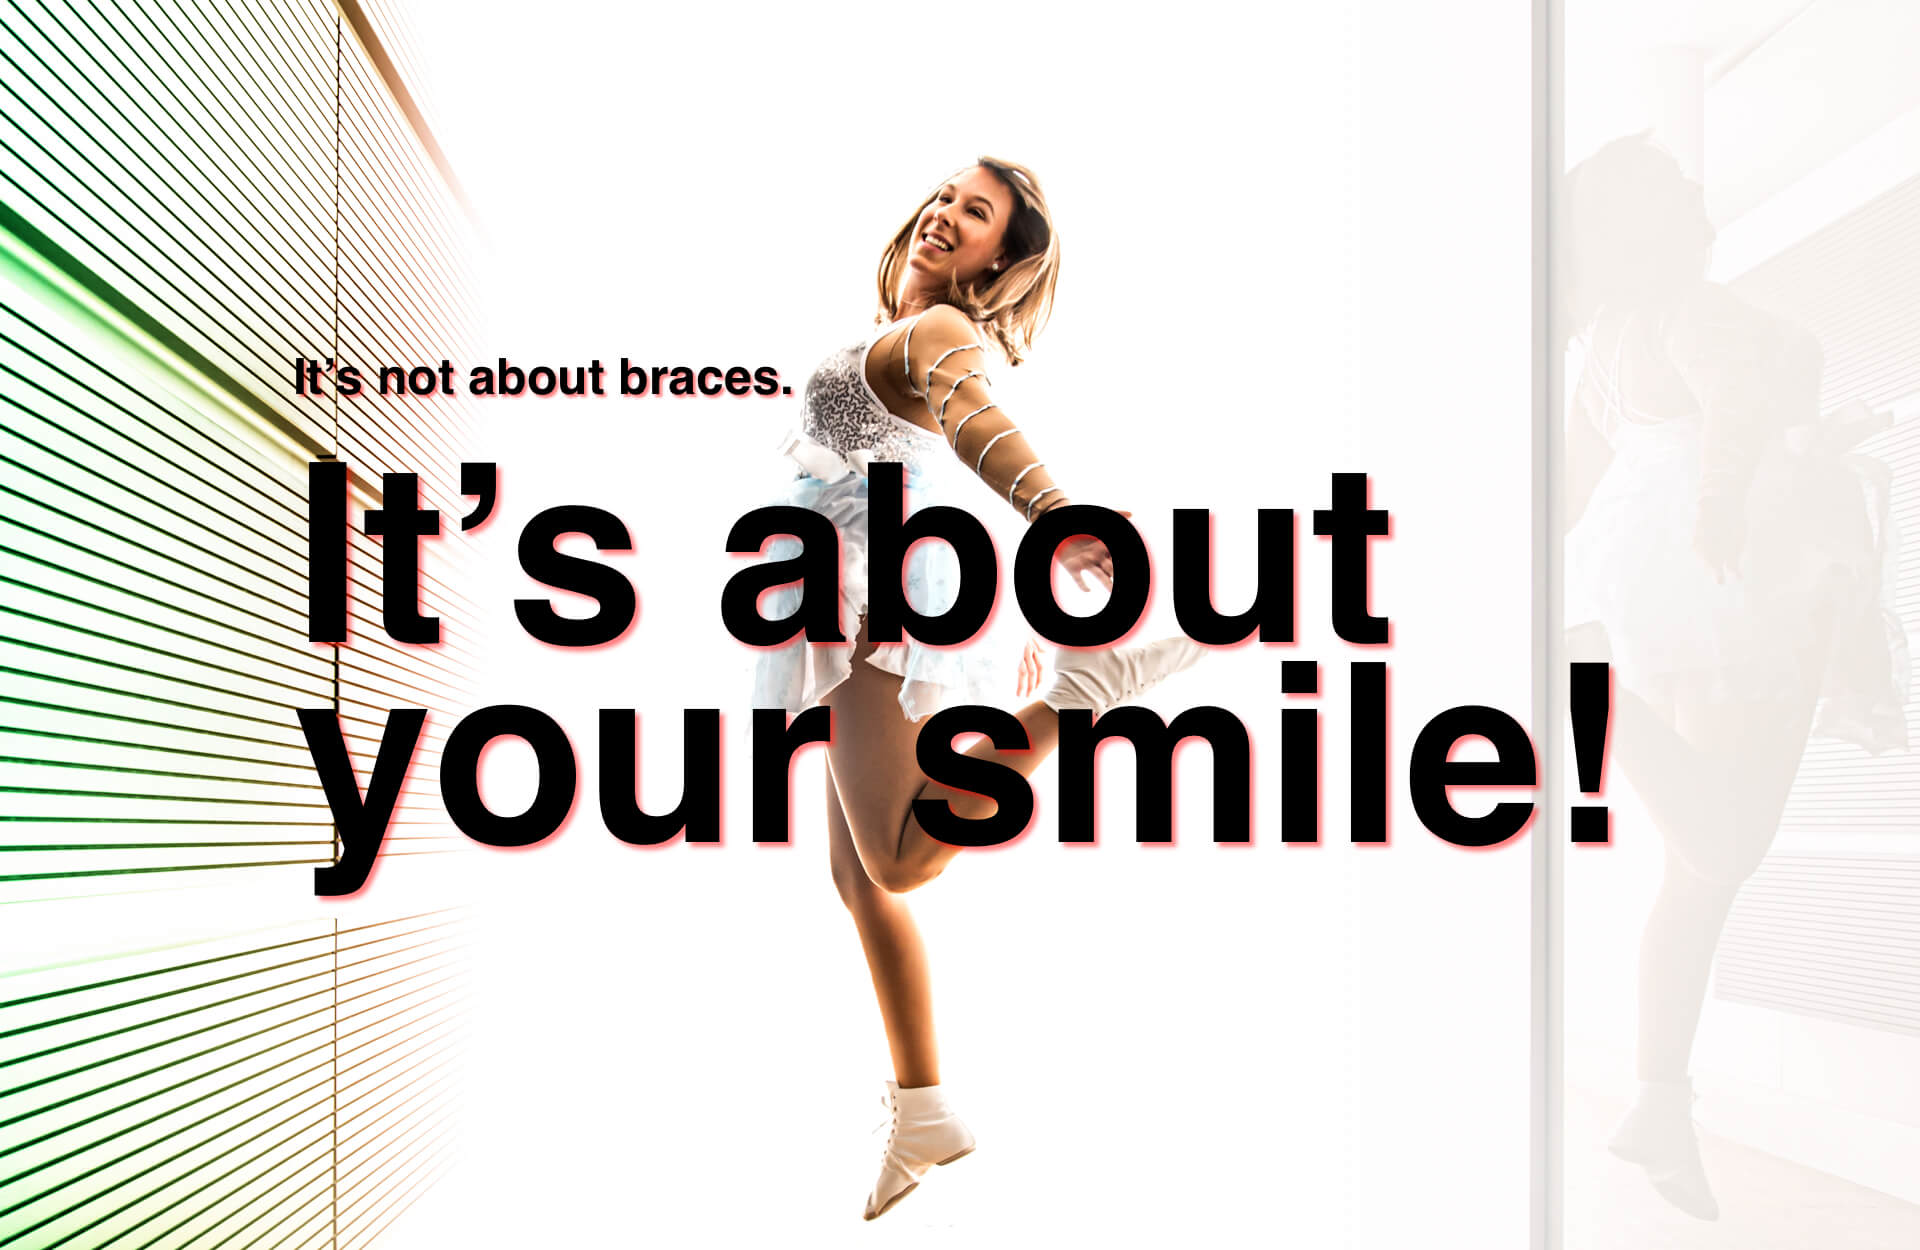 It's about your smile!